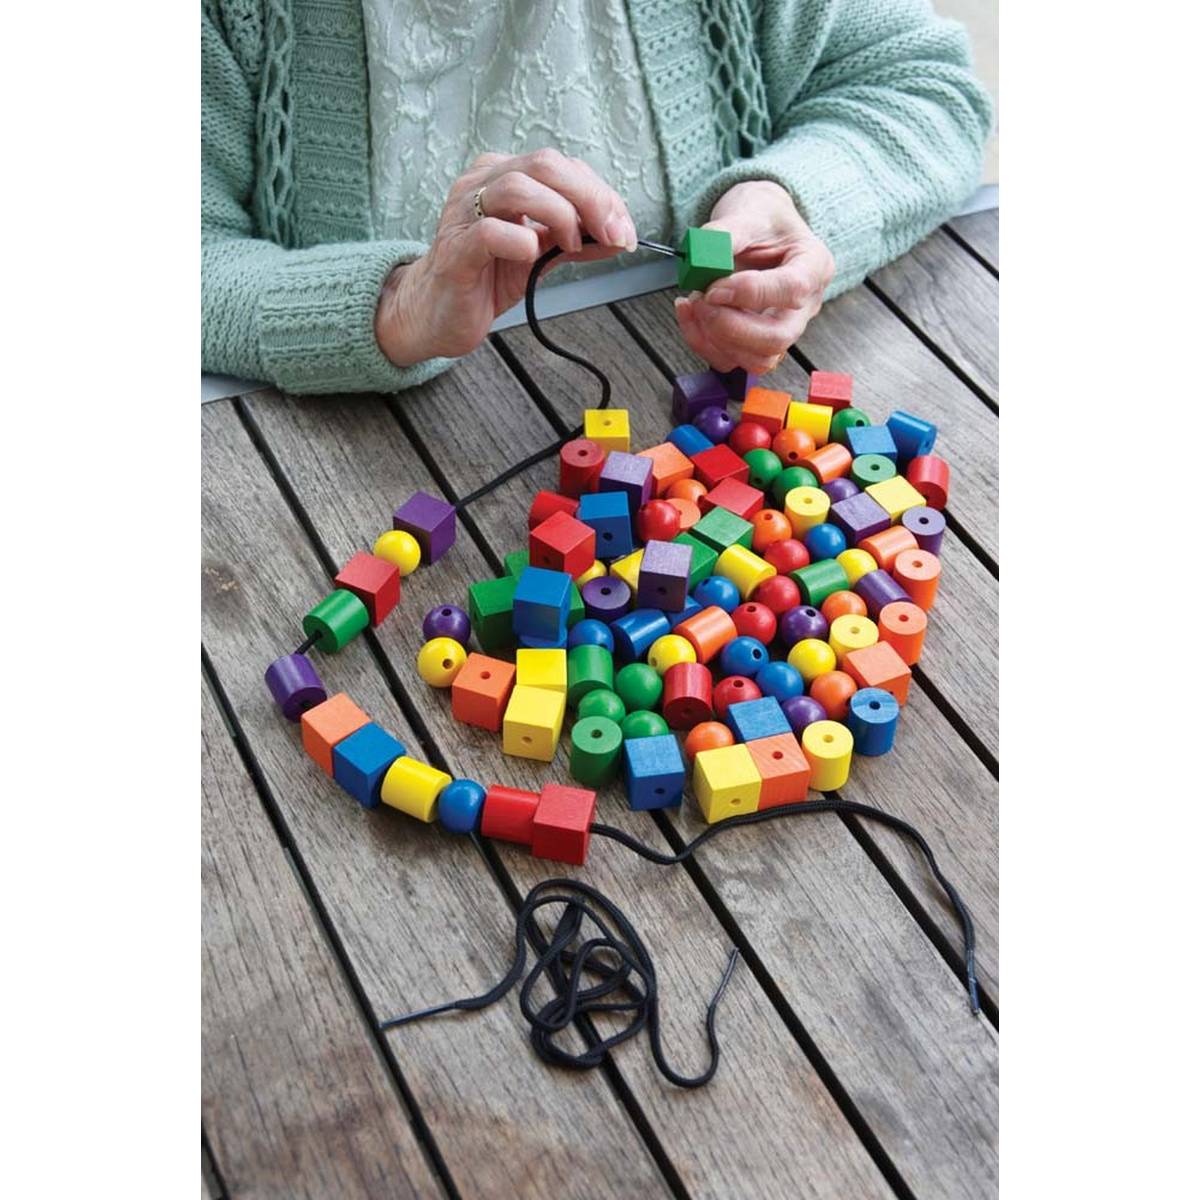 Melissa & Doug Primary Lacing Beads - Educational Toy With 30